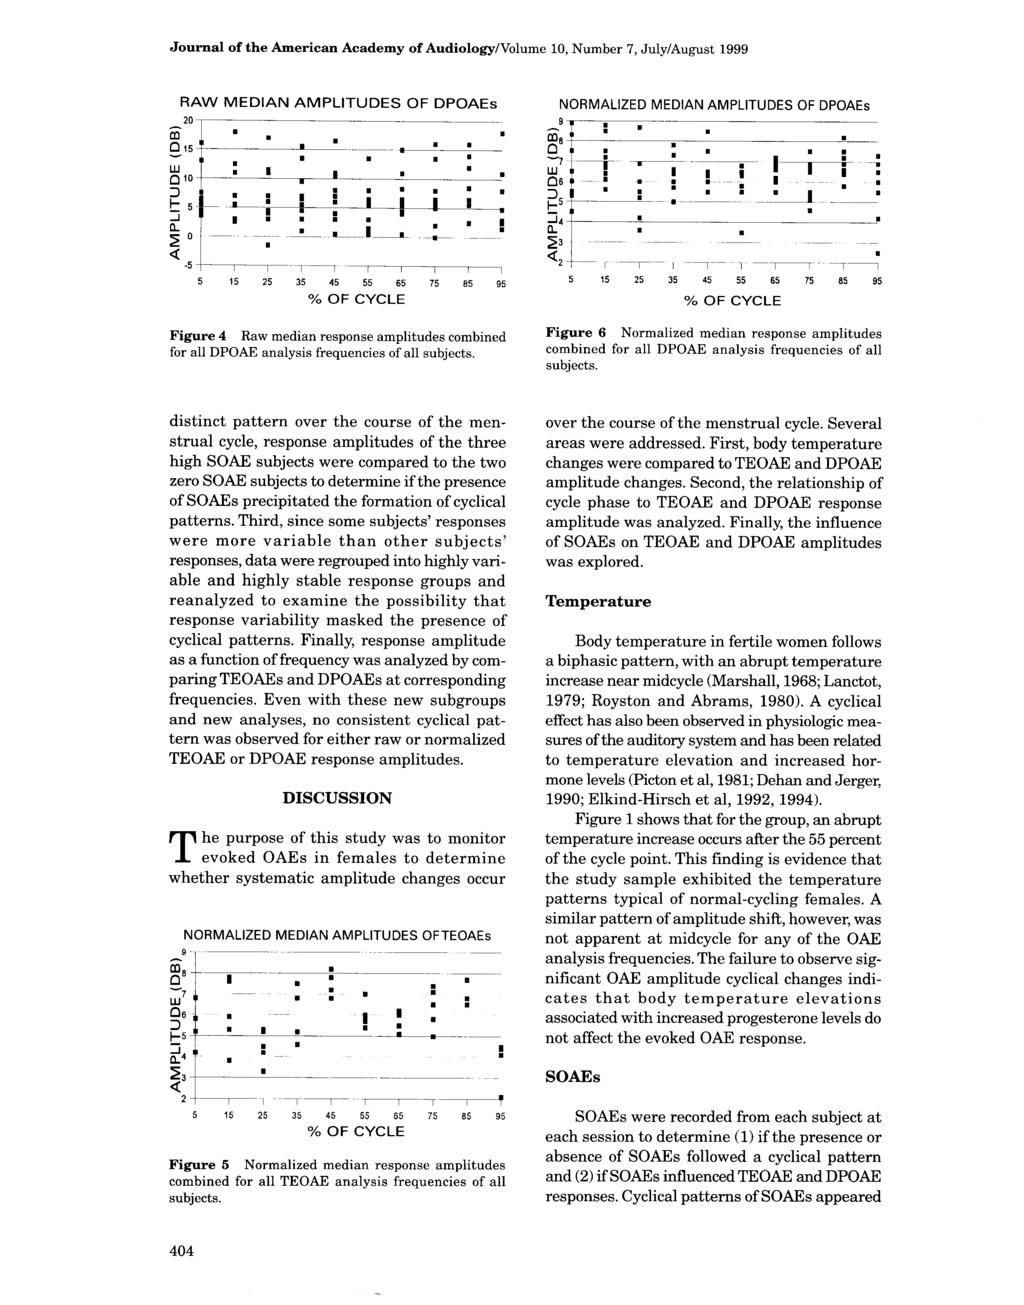 Journal of the American Academy of Audiology/Volume 10, Number 7, July/August 1999 RAW MEDIAN AMPLITUDES OF DPOAEs NORMALIZED MEDIAN AMPLITUDES OF DPOAEs 20-F-0 m Q8-0 15 ----- - 0 7 -I W 1 1, W 0 10